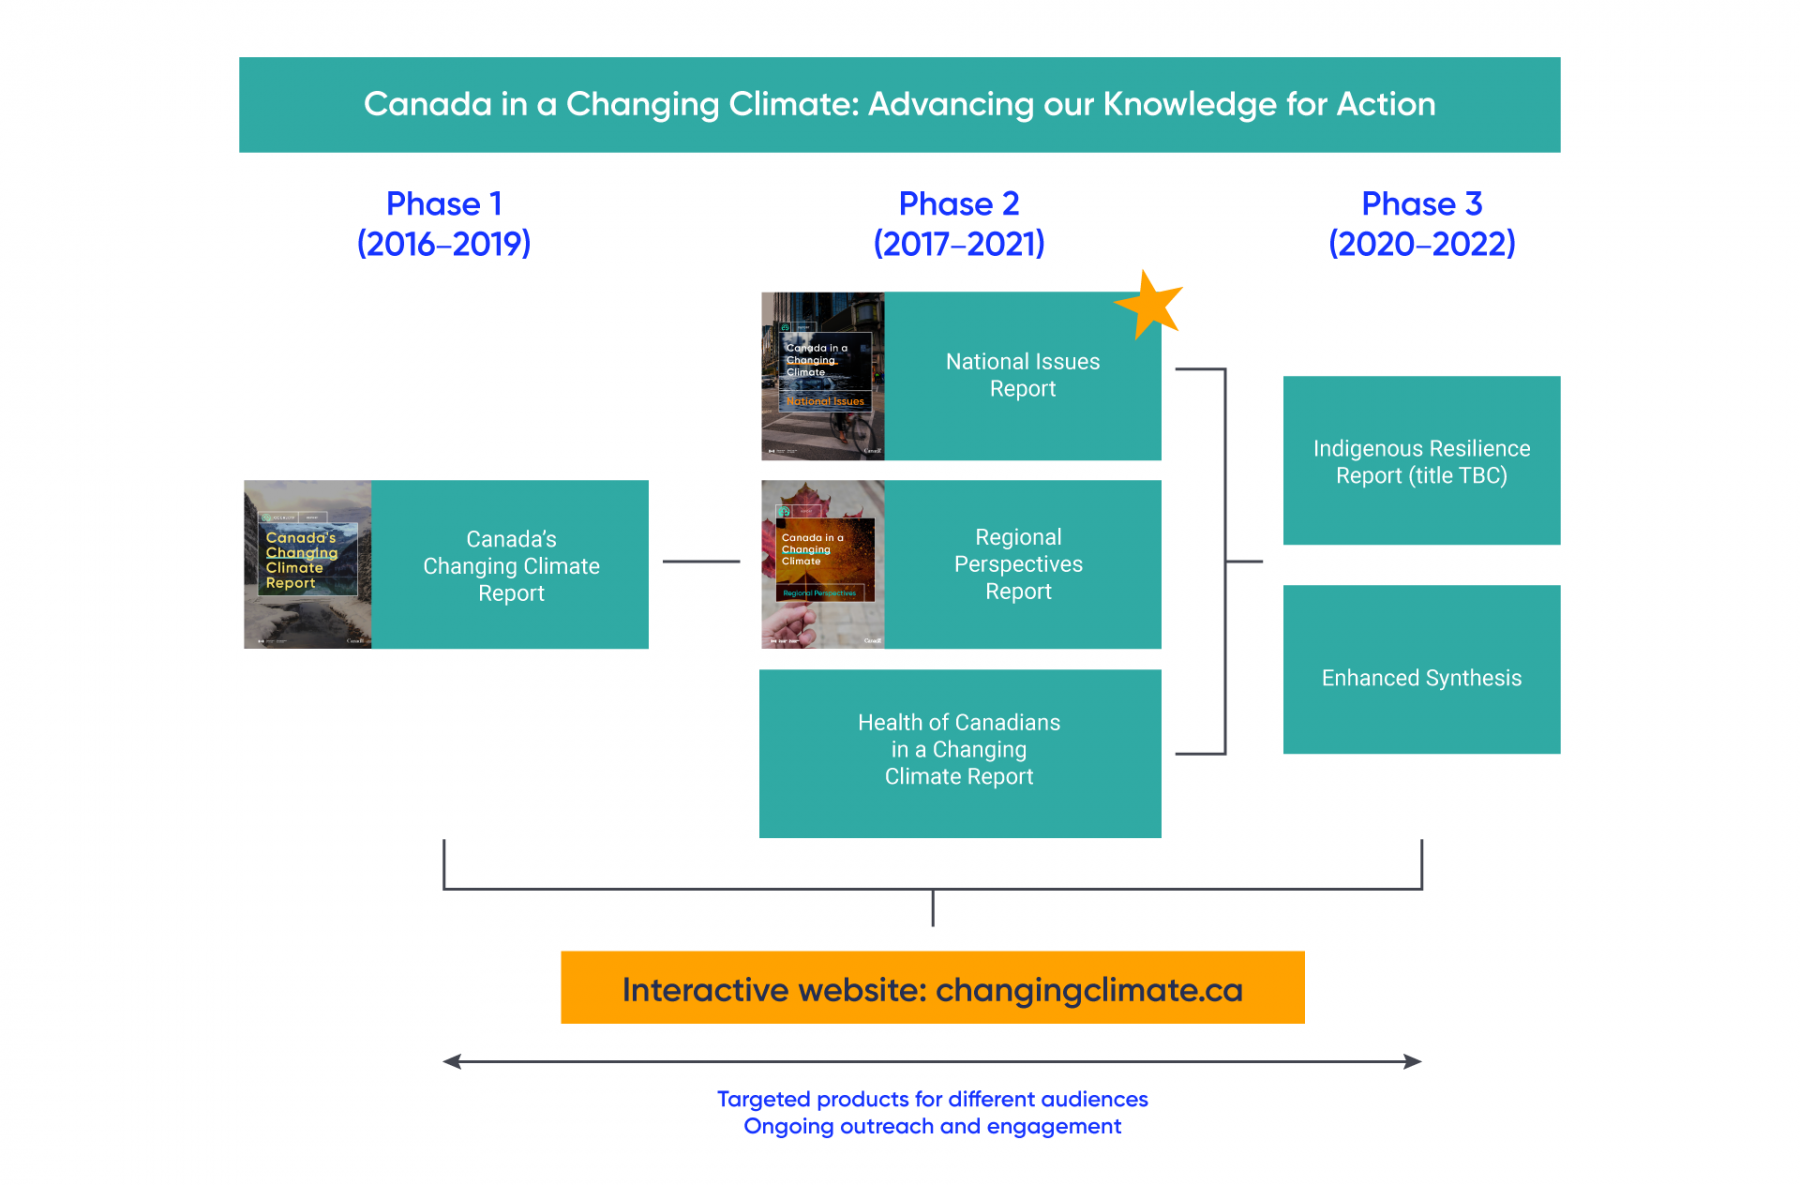 Figure with images representing the reports developed under the national assessment process between 2016 and 2022. Phase 1, taking place between 2016 and 2019, involves the production of a report titled Canada’s Changing Climate Report. Phase 2, taking place between 2017 and 2021, involves the production of the National Issues Report, Regional Perspectives Report, and the Health of Canadians in a Changing Climate Report. Phase 3, taking place between 2020 and 2022, involves the production of a report on Indigenous Resilience (title to be confirmed) and an Enhanced Synthesis report. All of these reports will be available on the interactive website, changingclimate.ca.